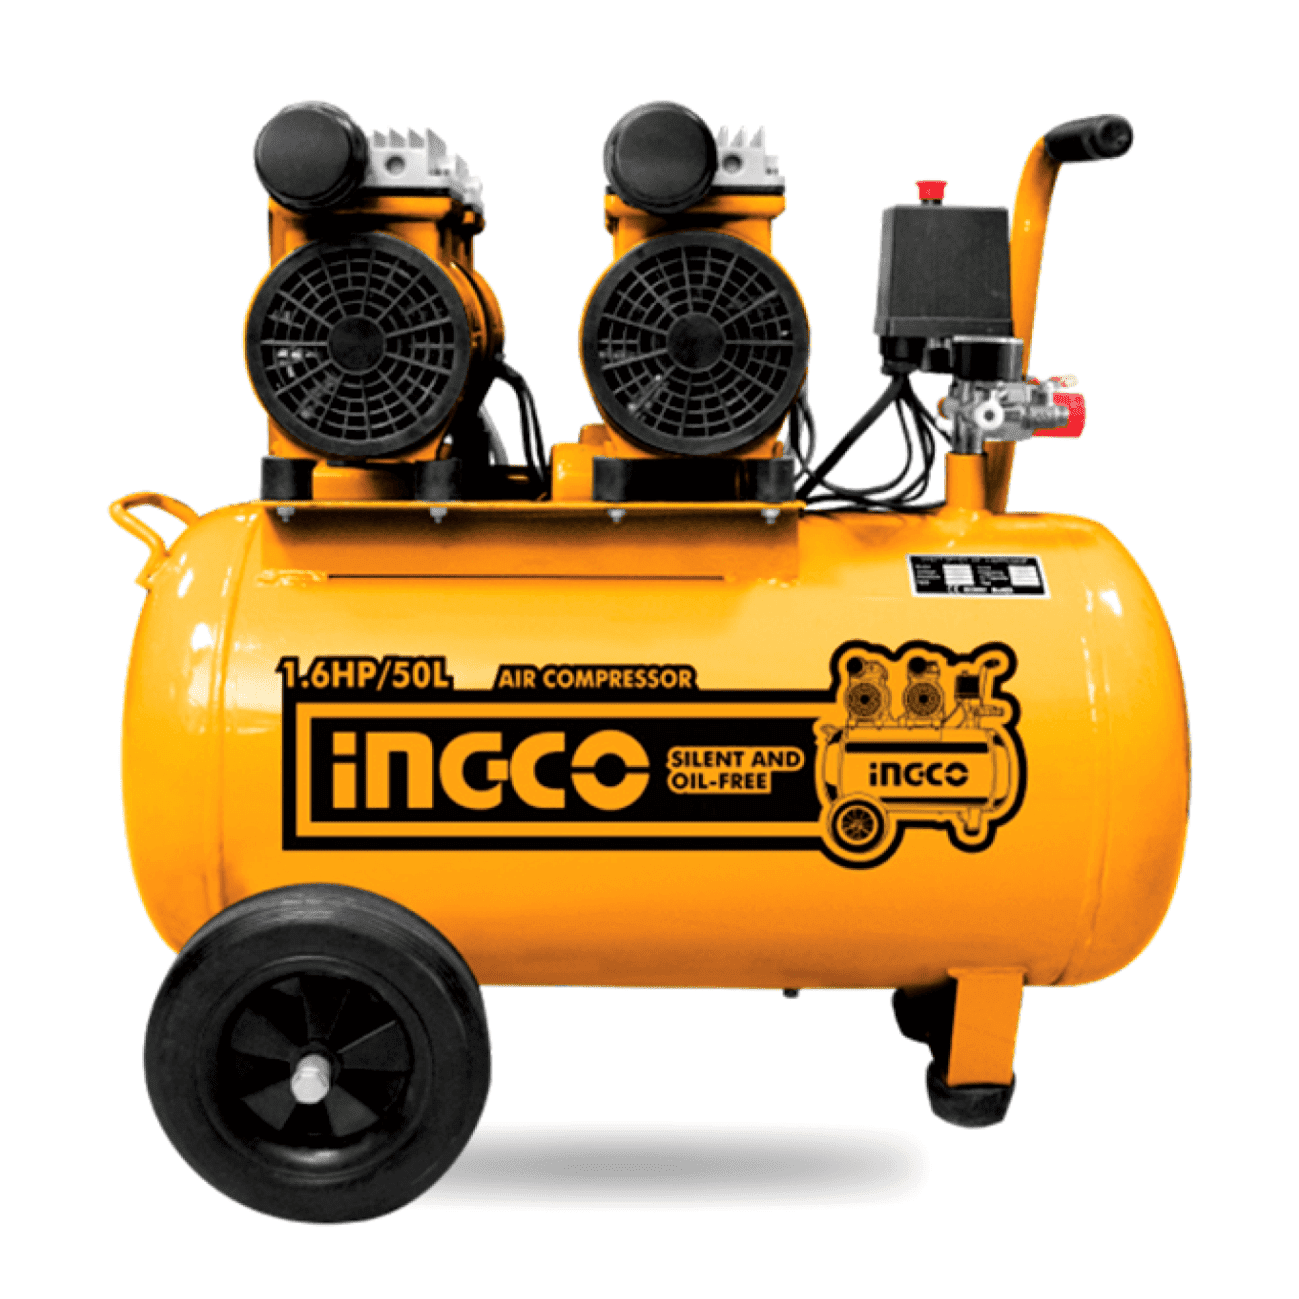 Ingco Silent And Oil Free Air Compressor 1.6HP 50L - ACS215506 | Supply Master | Accra, Ghana Tools Building Steel Engineering Hardware tool